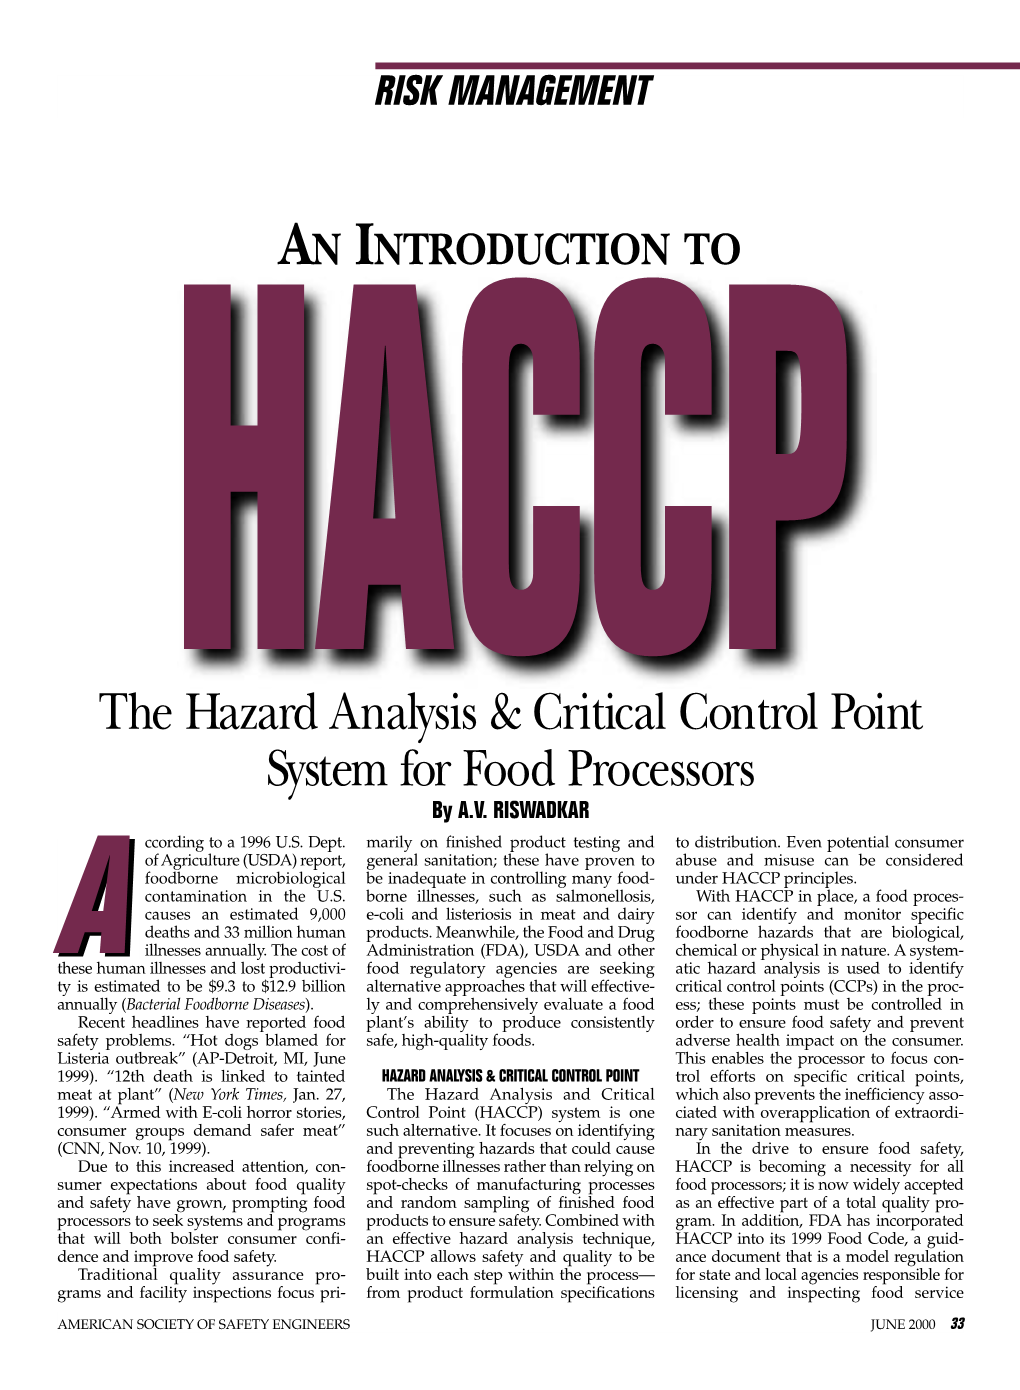 The Hazard Analysis & Critical Control Point System for Food Processors